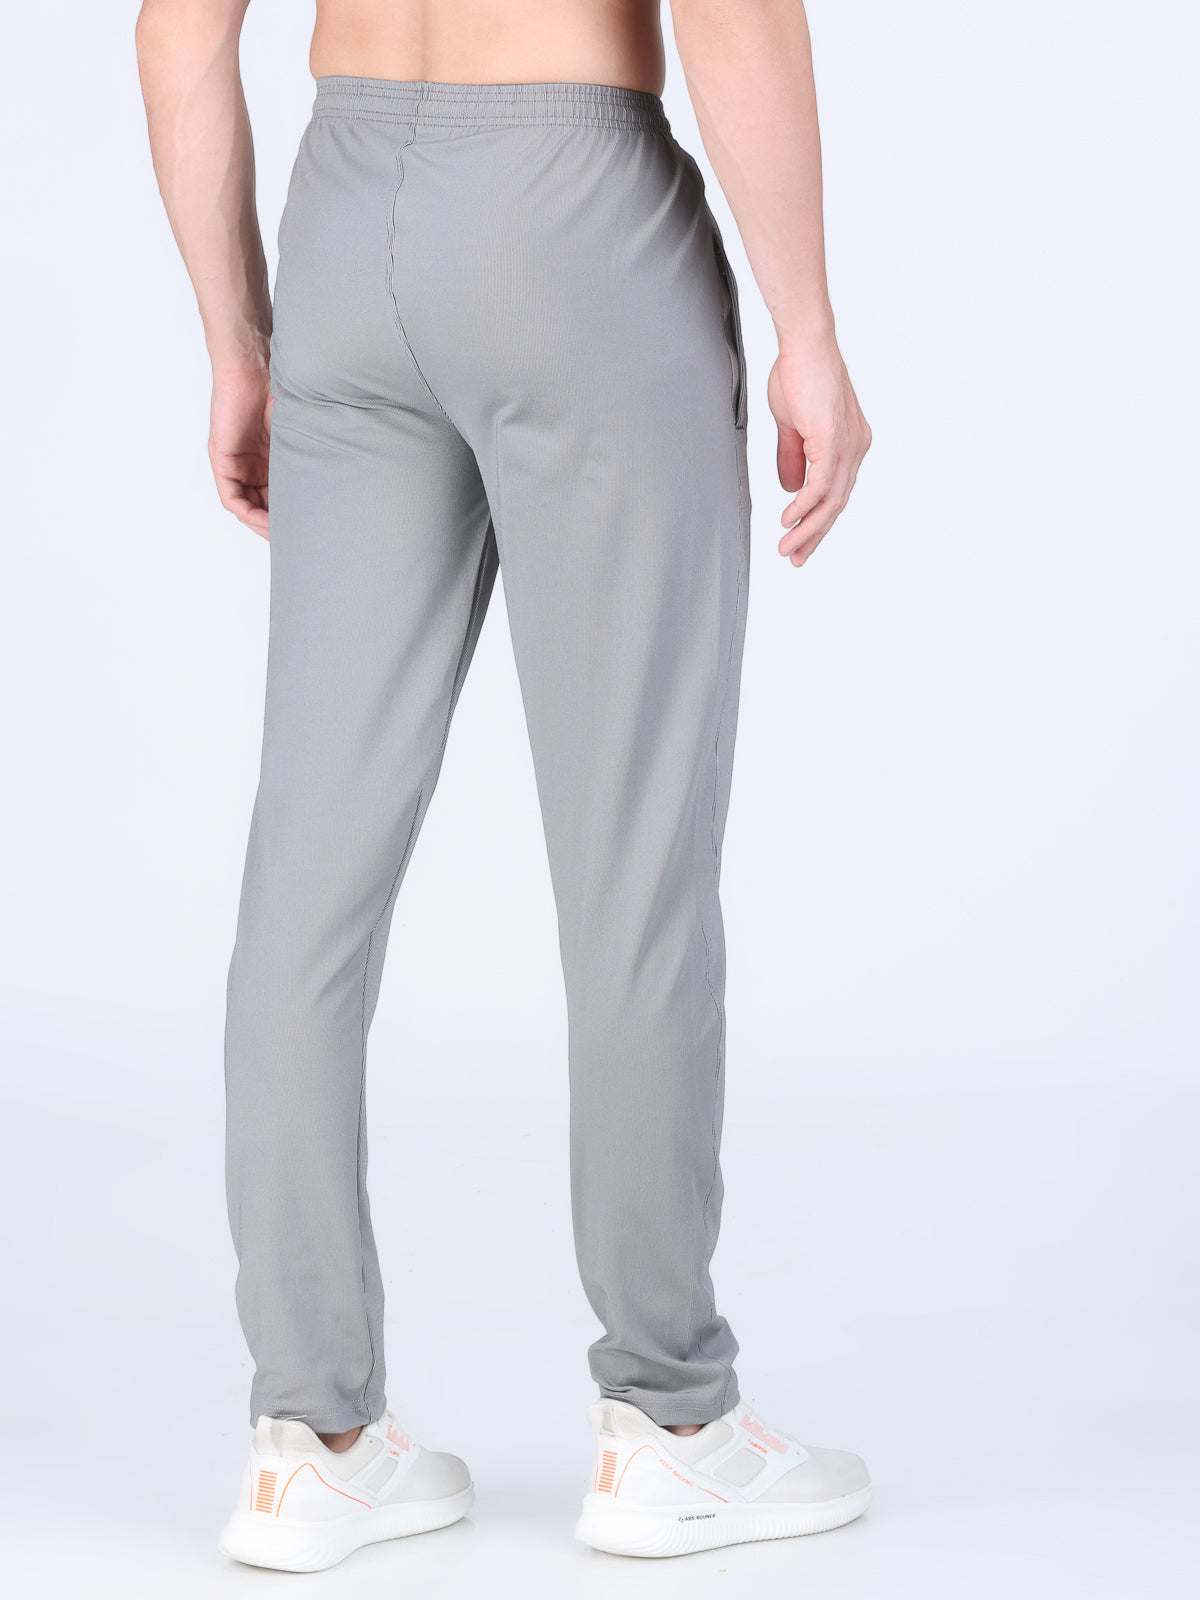 Combo of 2 Men's 4 Way Stretch Lining Silver and Coffee Track Pant